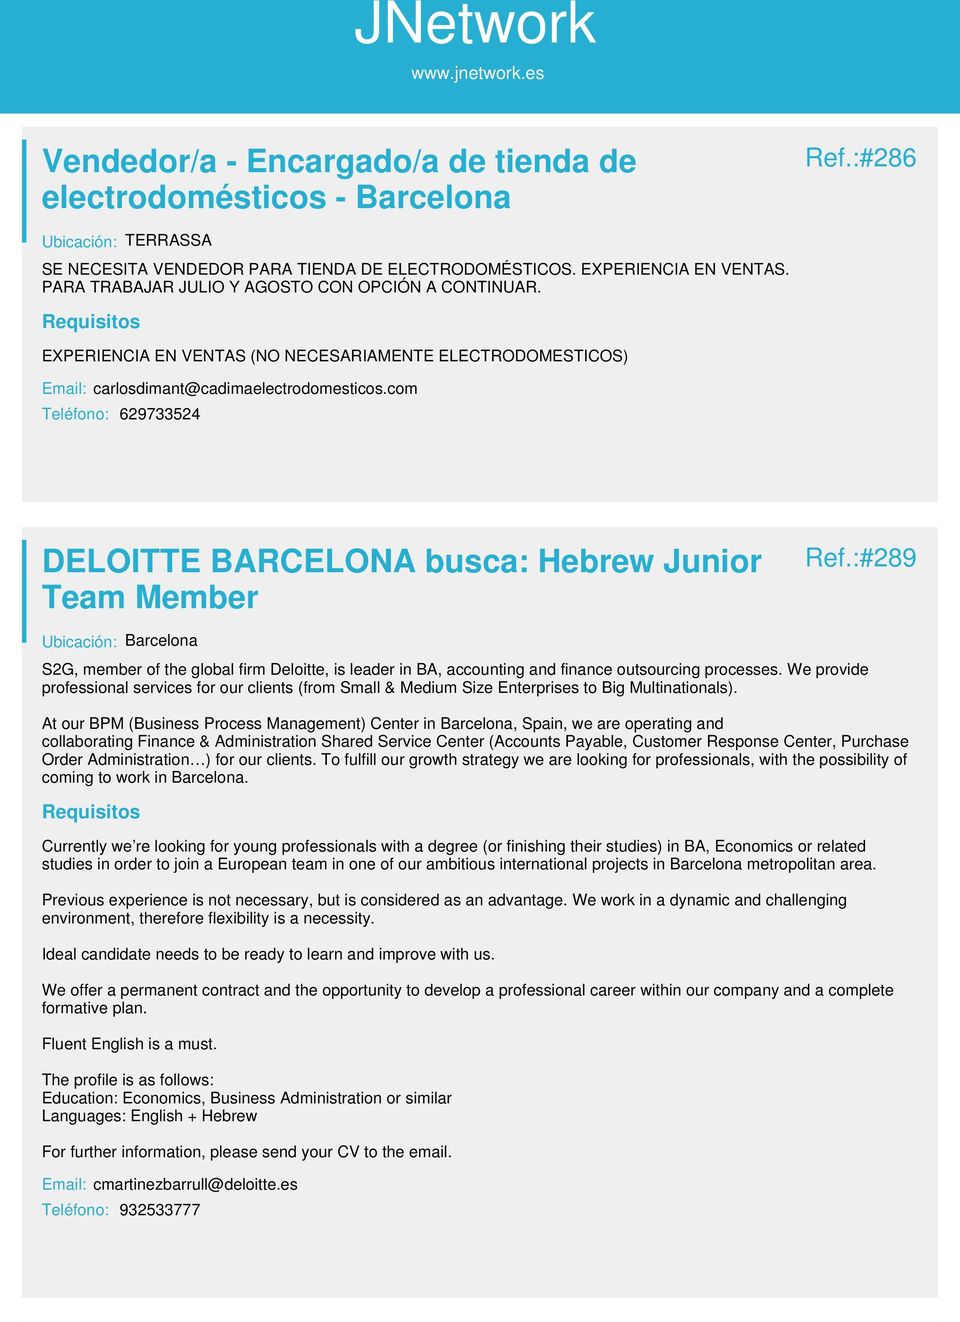 com Teléfono: 629733524 DELOITTE BARCELONA busca: Hebrew Junior Team Member Ref.:#289 S2G, member of the global firm Deloitte, is leader in BA, accounting and finance outsourcing processes.